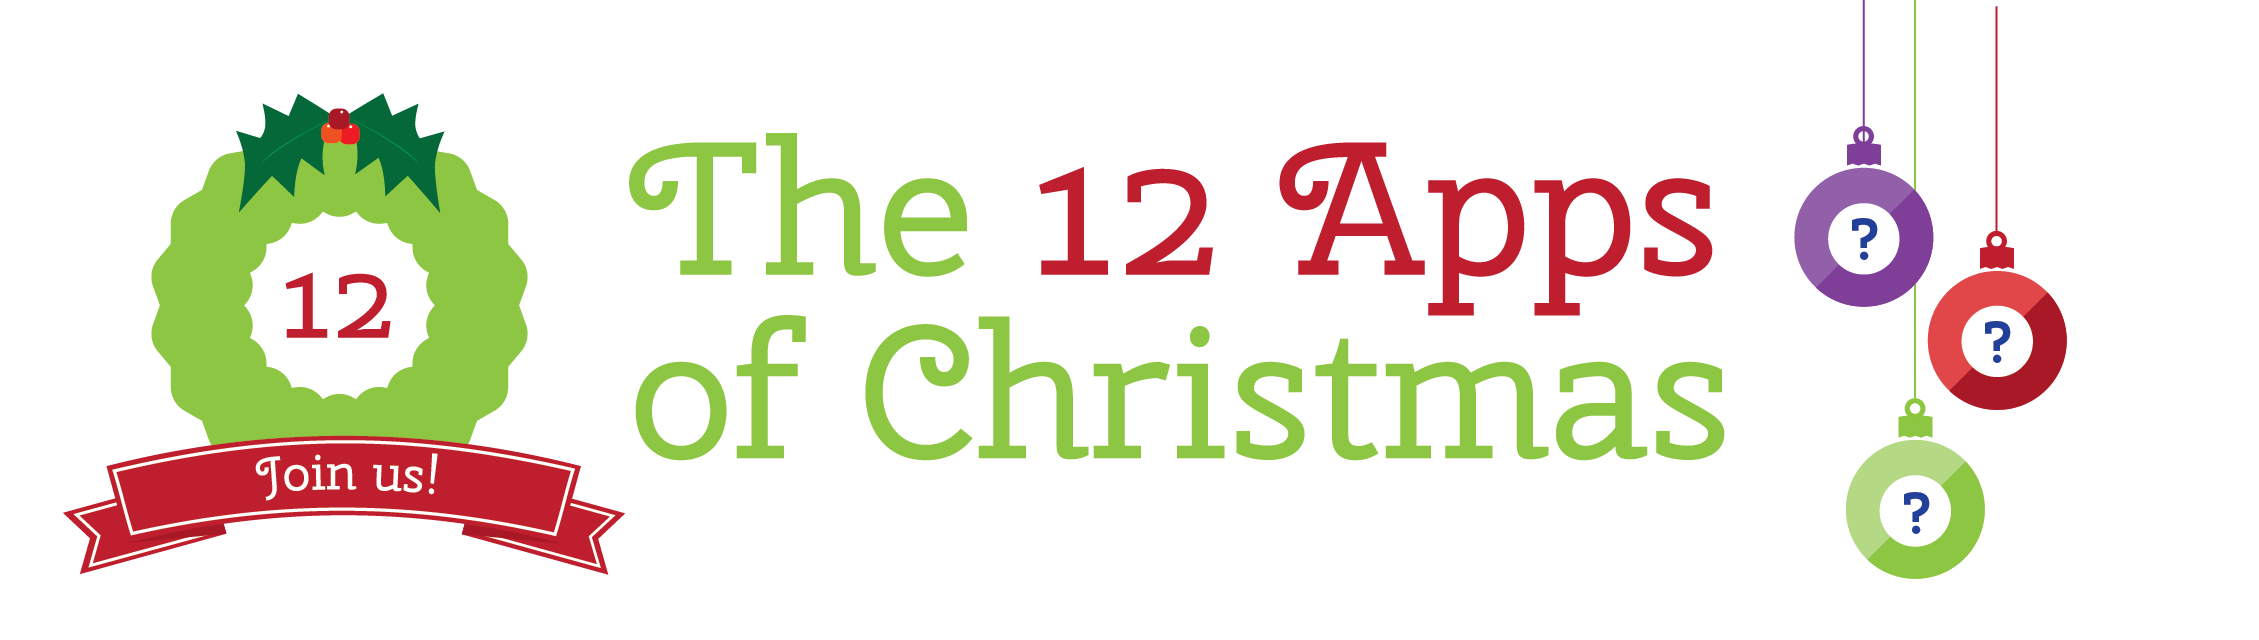 12 Apps of Christmas